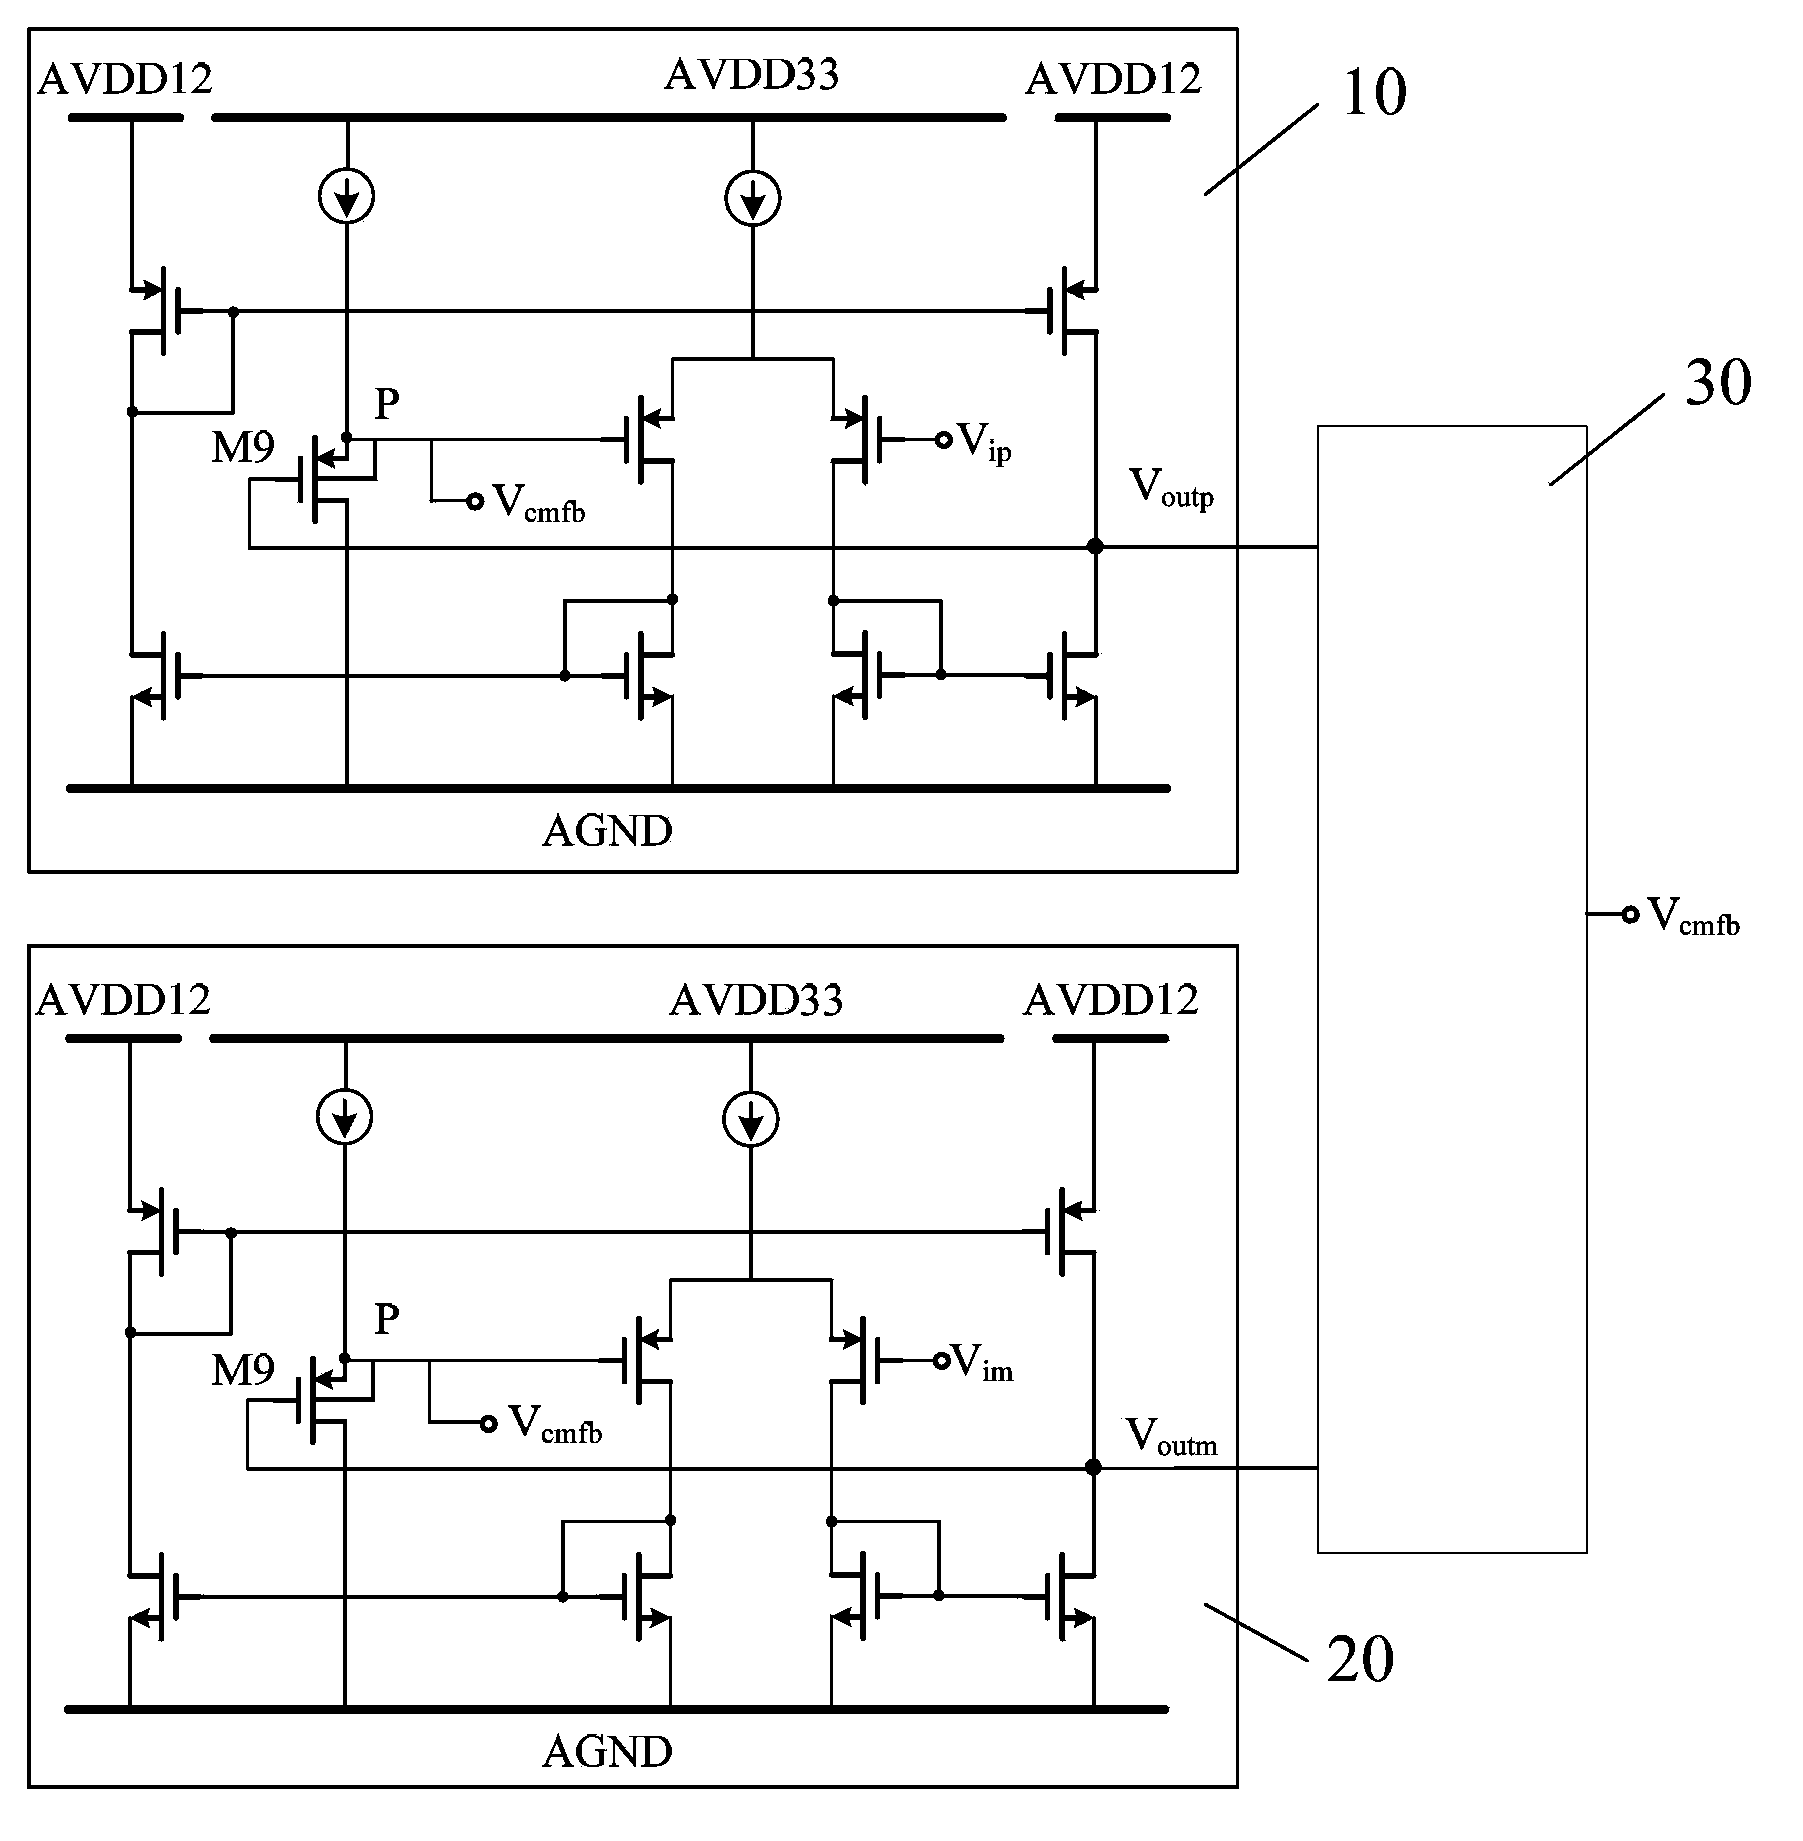 Operational amplifiers, level switching circuit and programmable gain amplifier